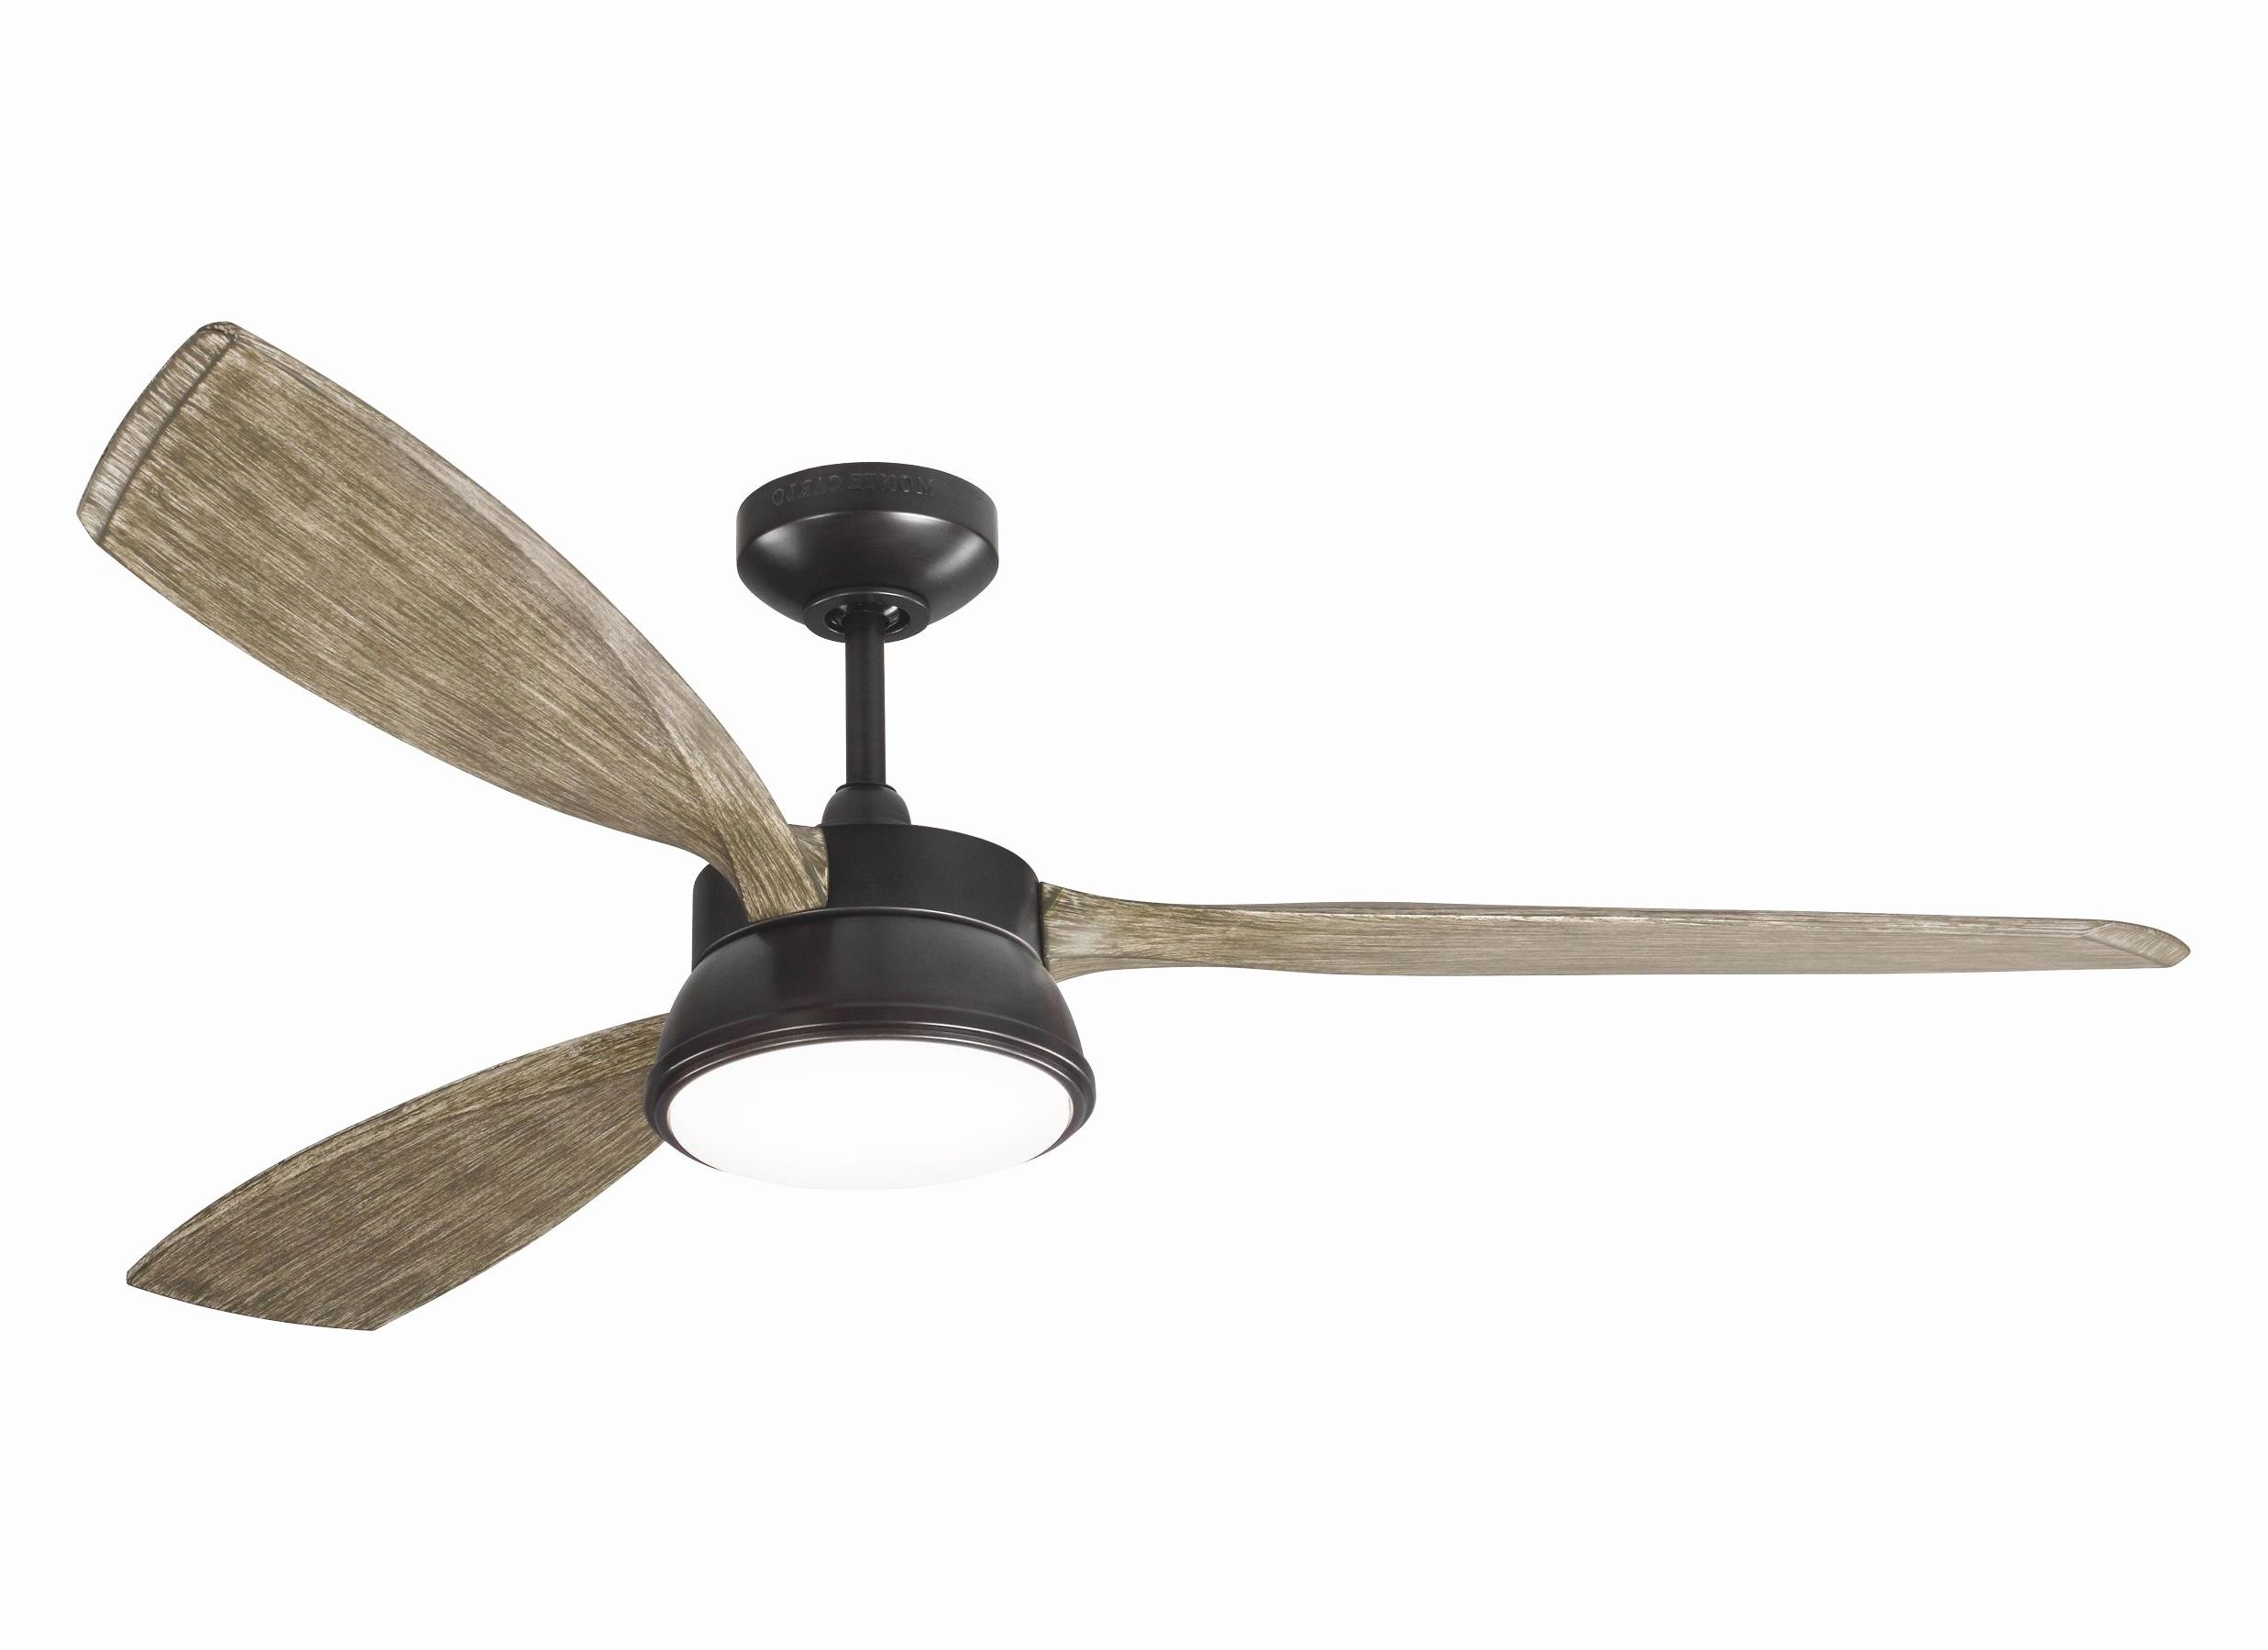 Nflscheap Intended For Outdoor Ceiling Fans At Walmart (View 7 of 20)